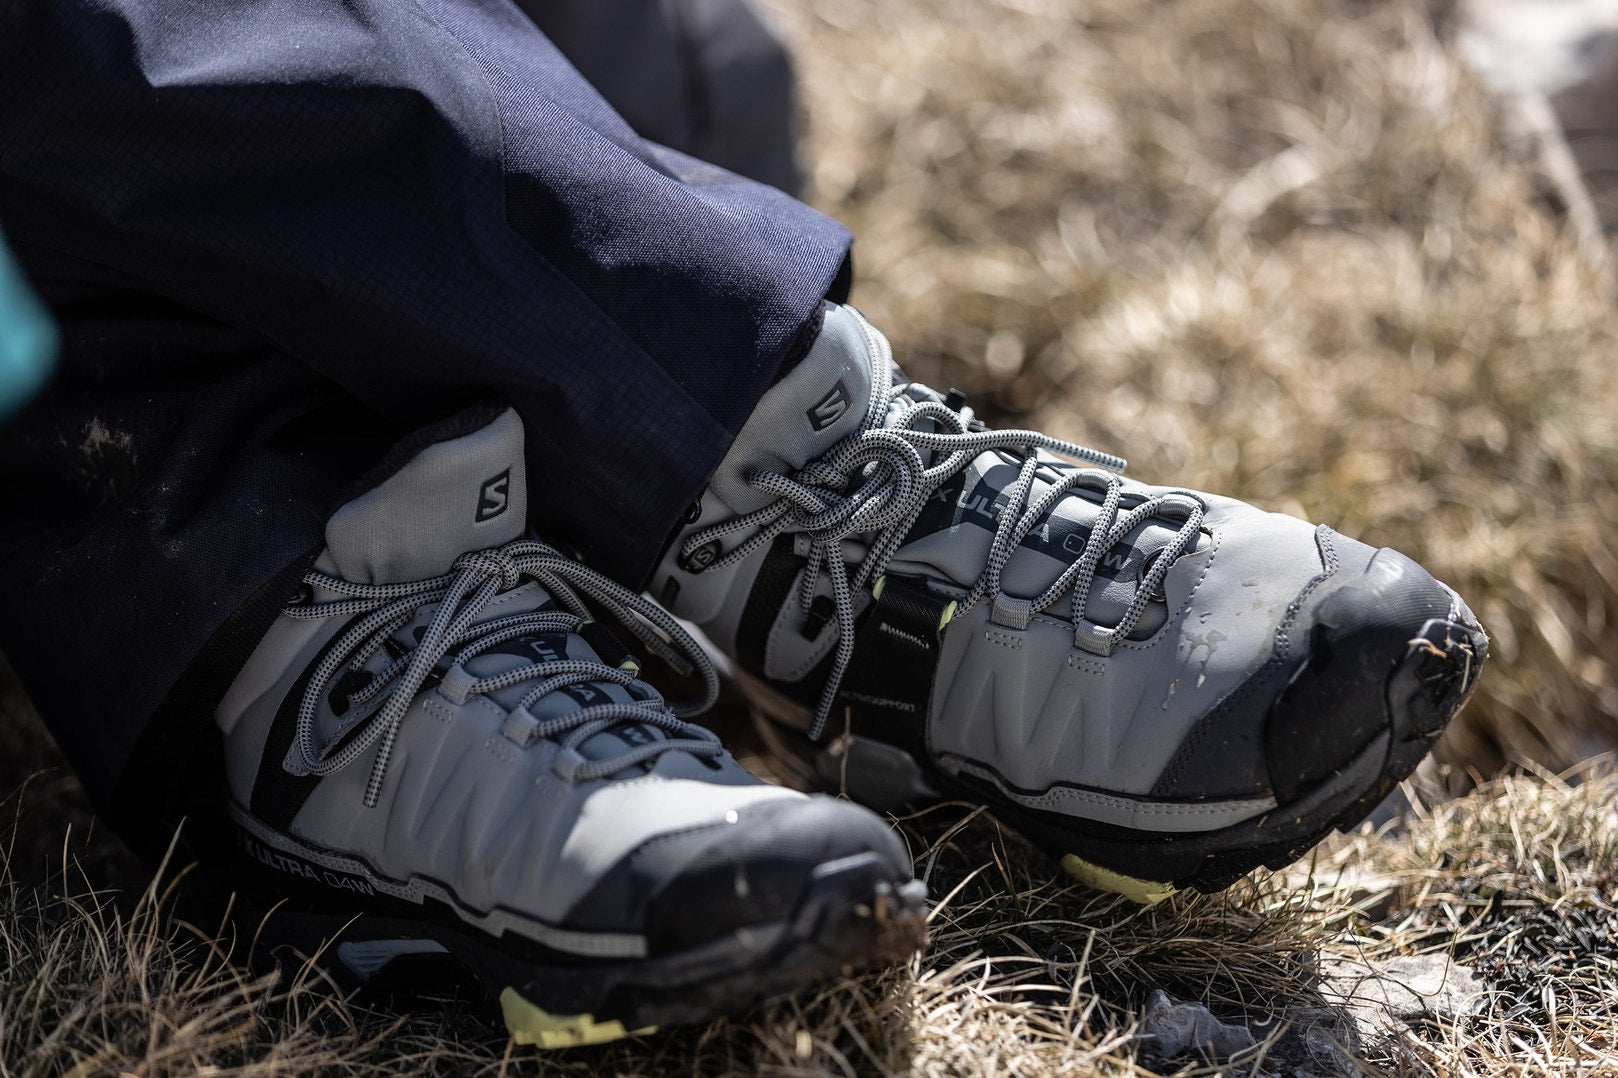 How to prevent blisters when hiking